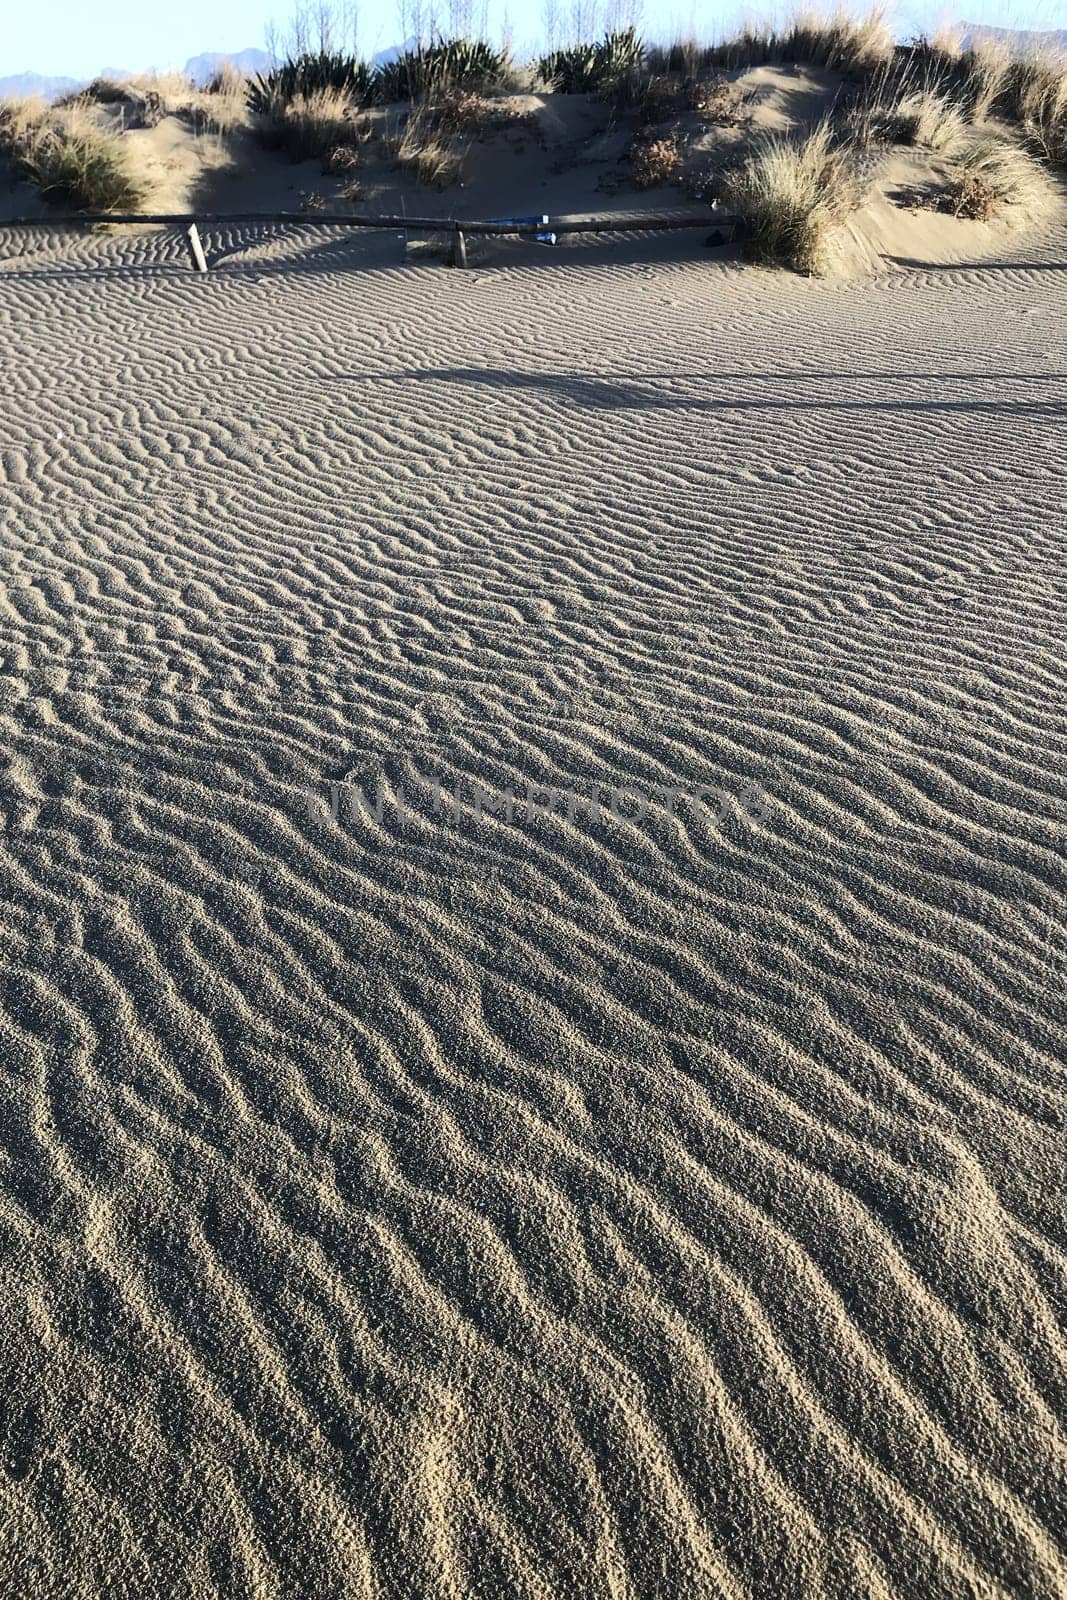 Photographic documentation of the sand smoothed and drawn by the strong wind 